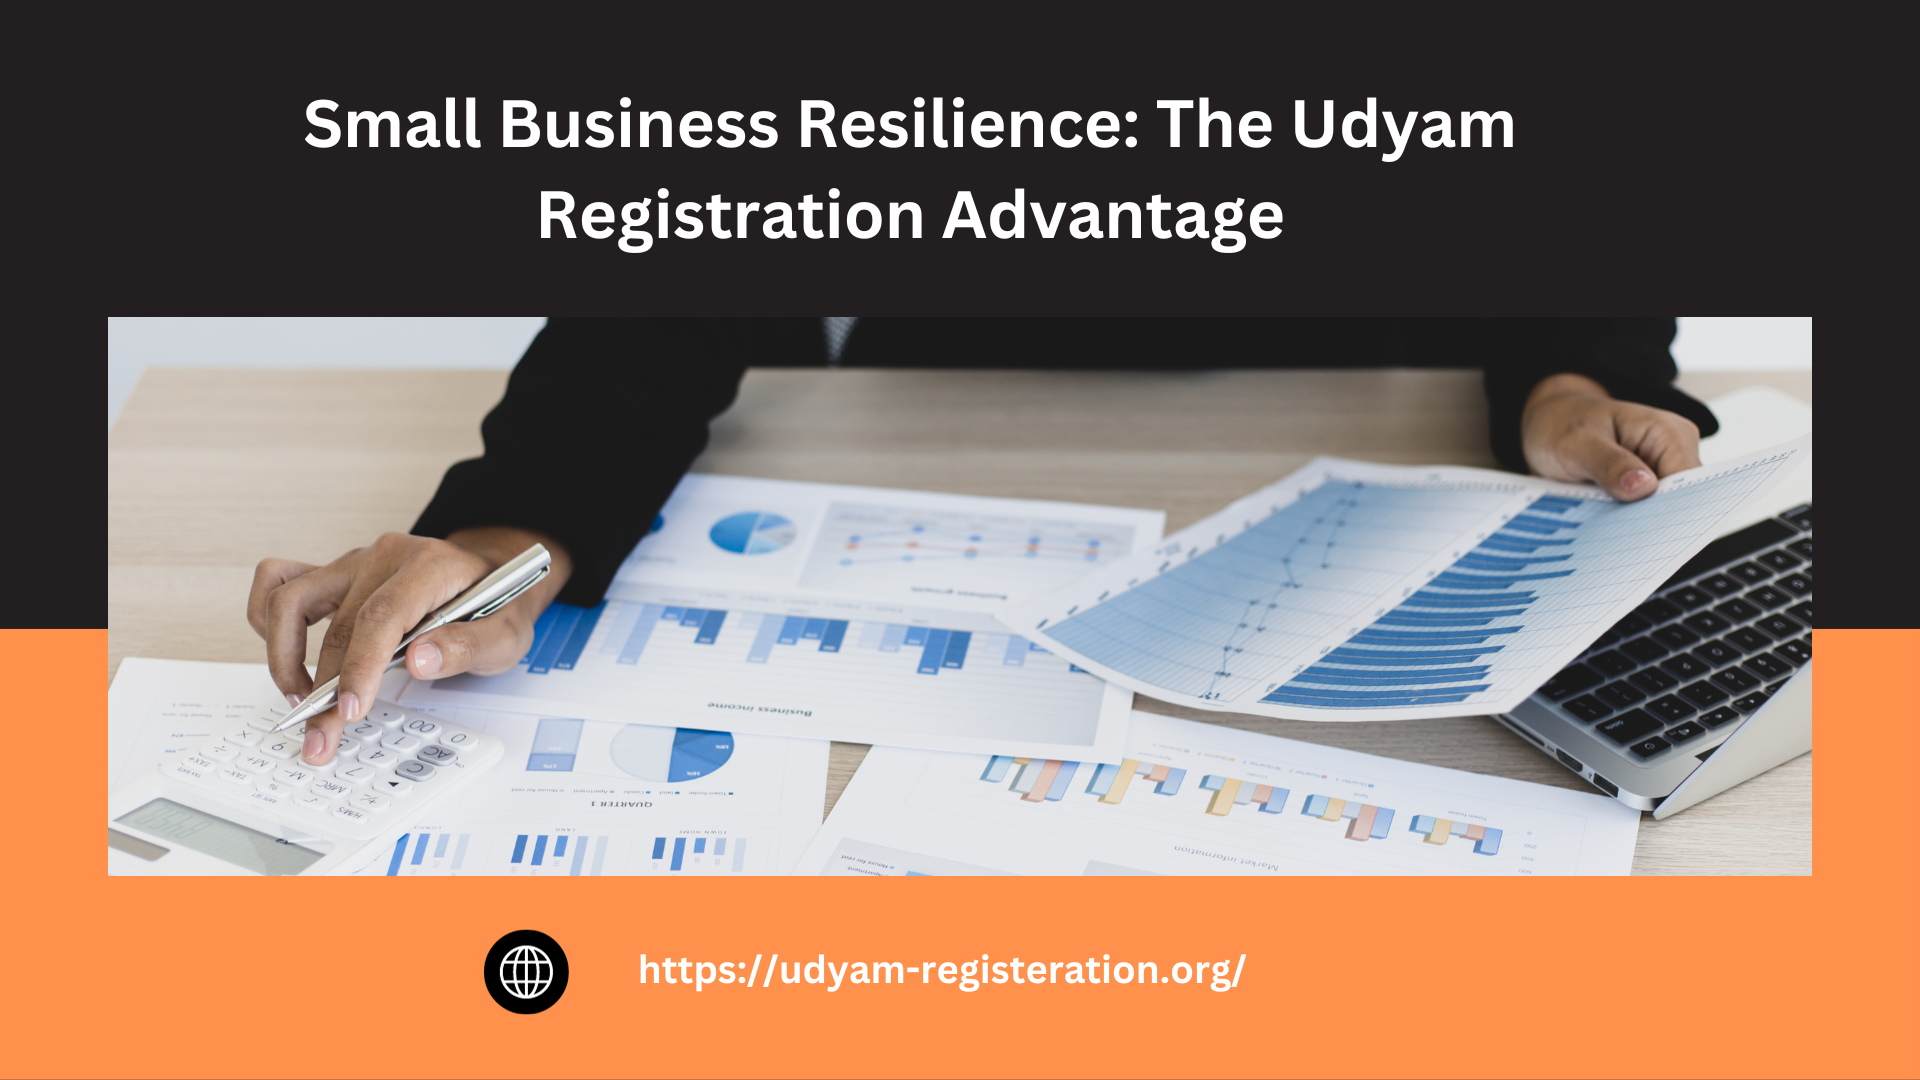 Small Business Resilience: The Udyam Registration Advantage